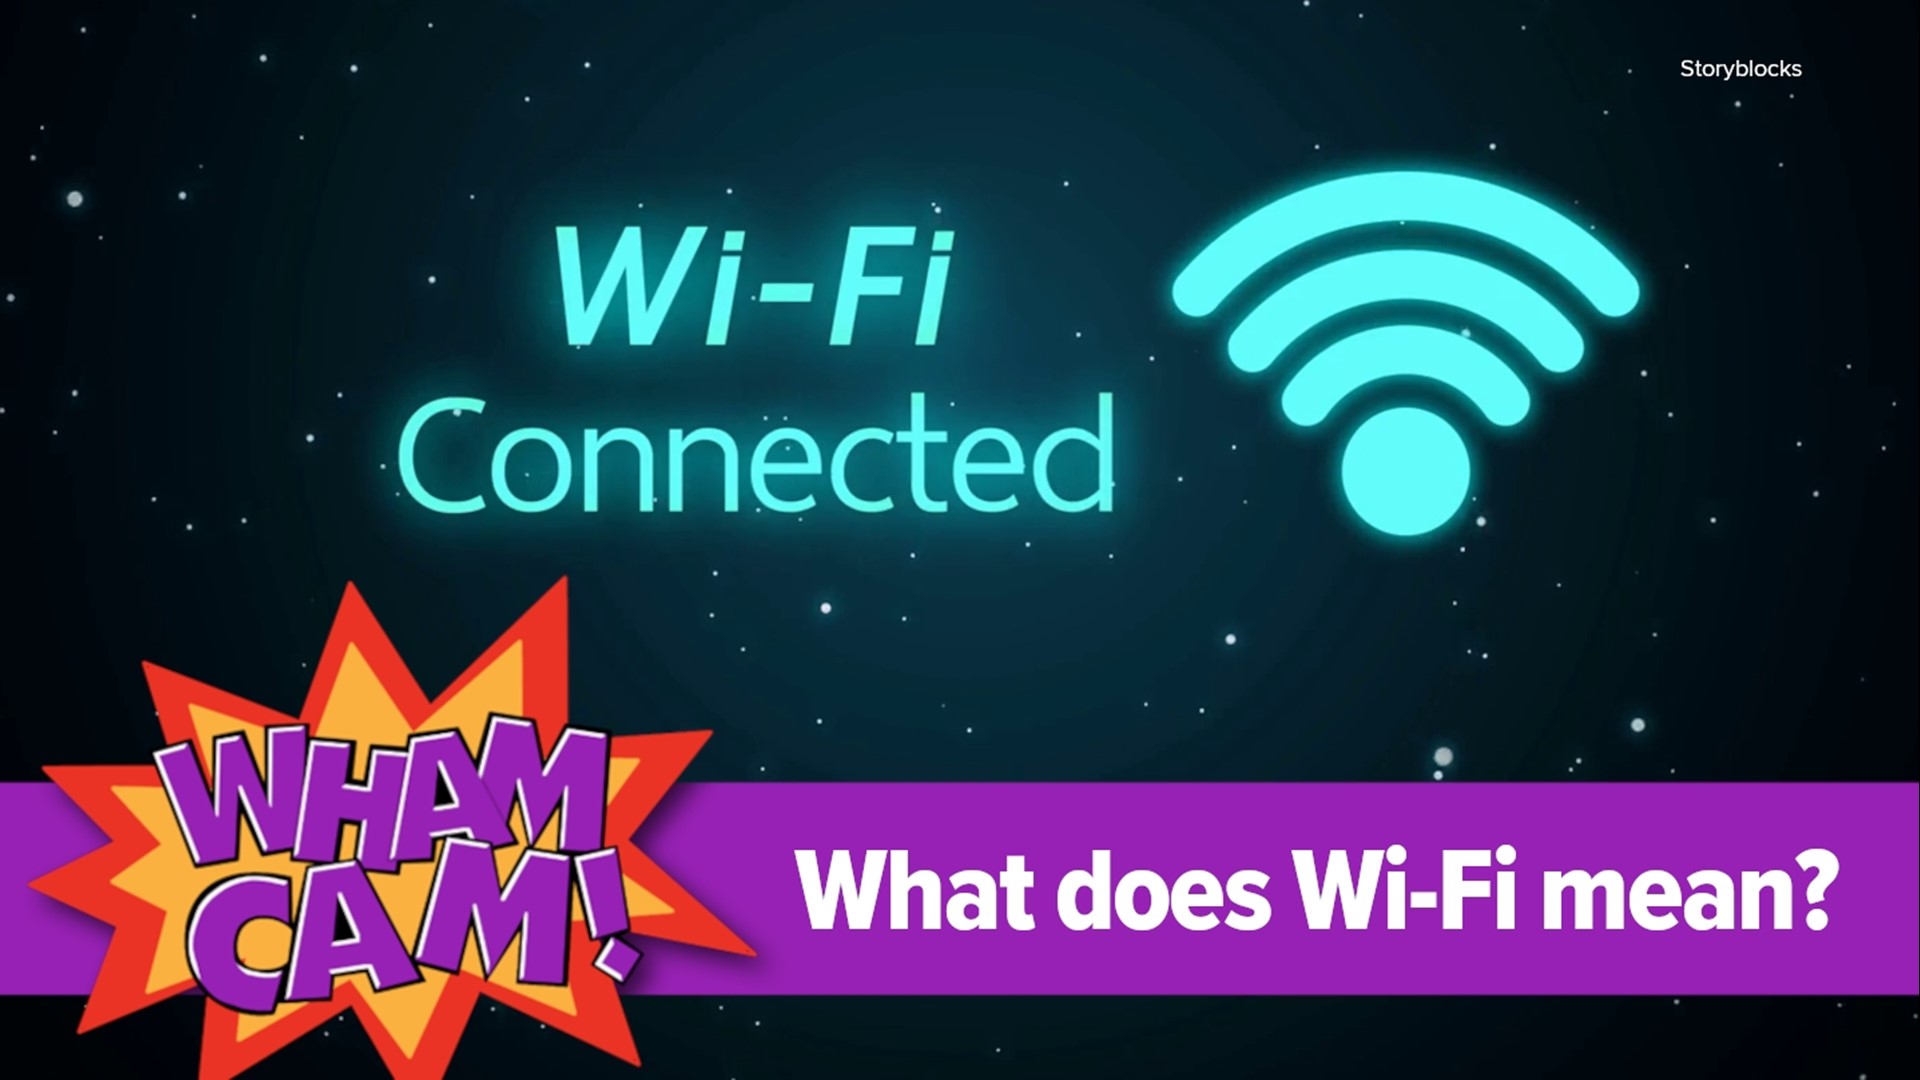 Ever wonder what Wi-Fi stands for? Joe headed to Weis Market in the Clarks Summit area to see if anyone there had the answer to this week's Wham Cam.